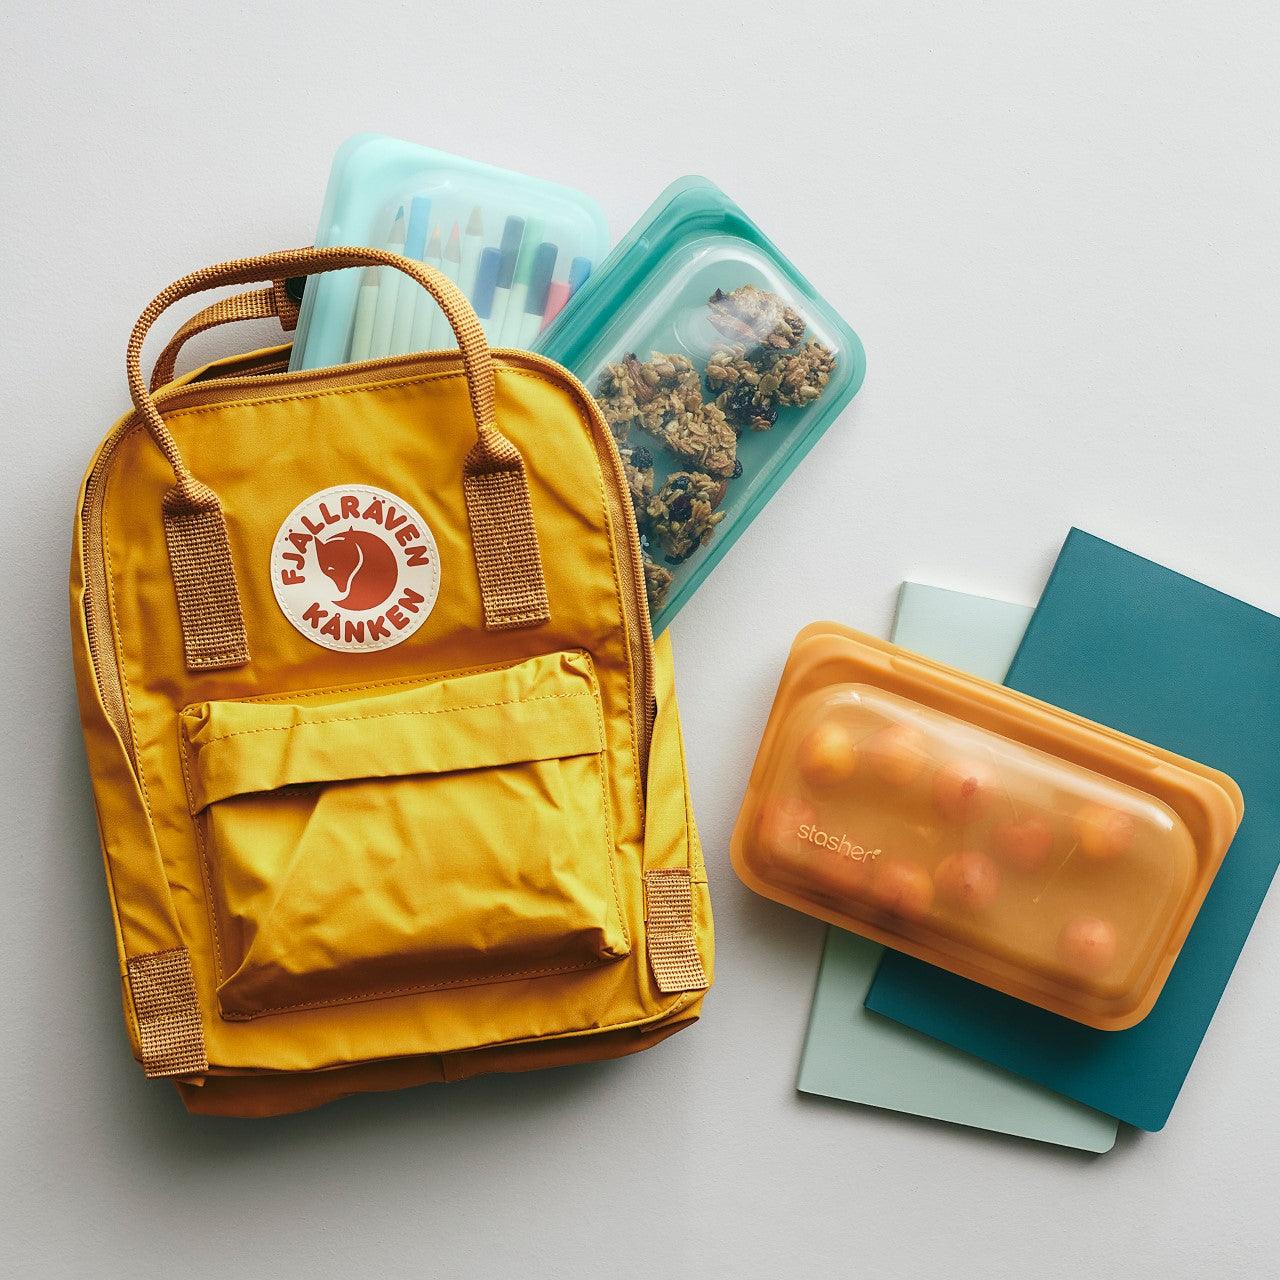 Reusable bags for backpack organization